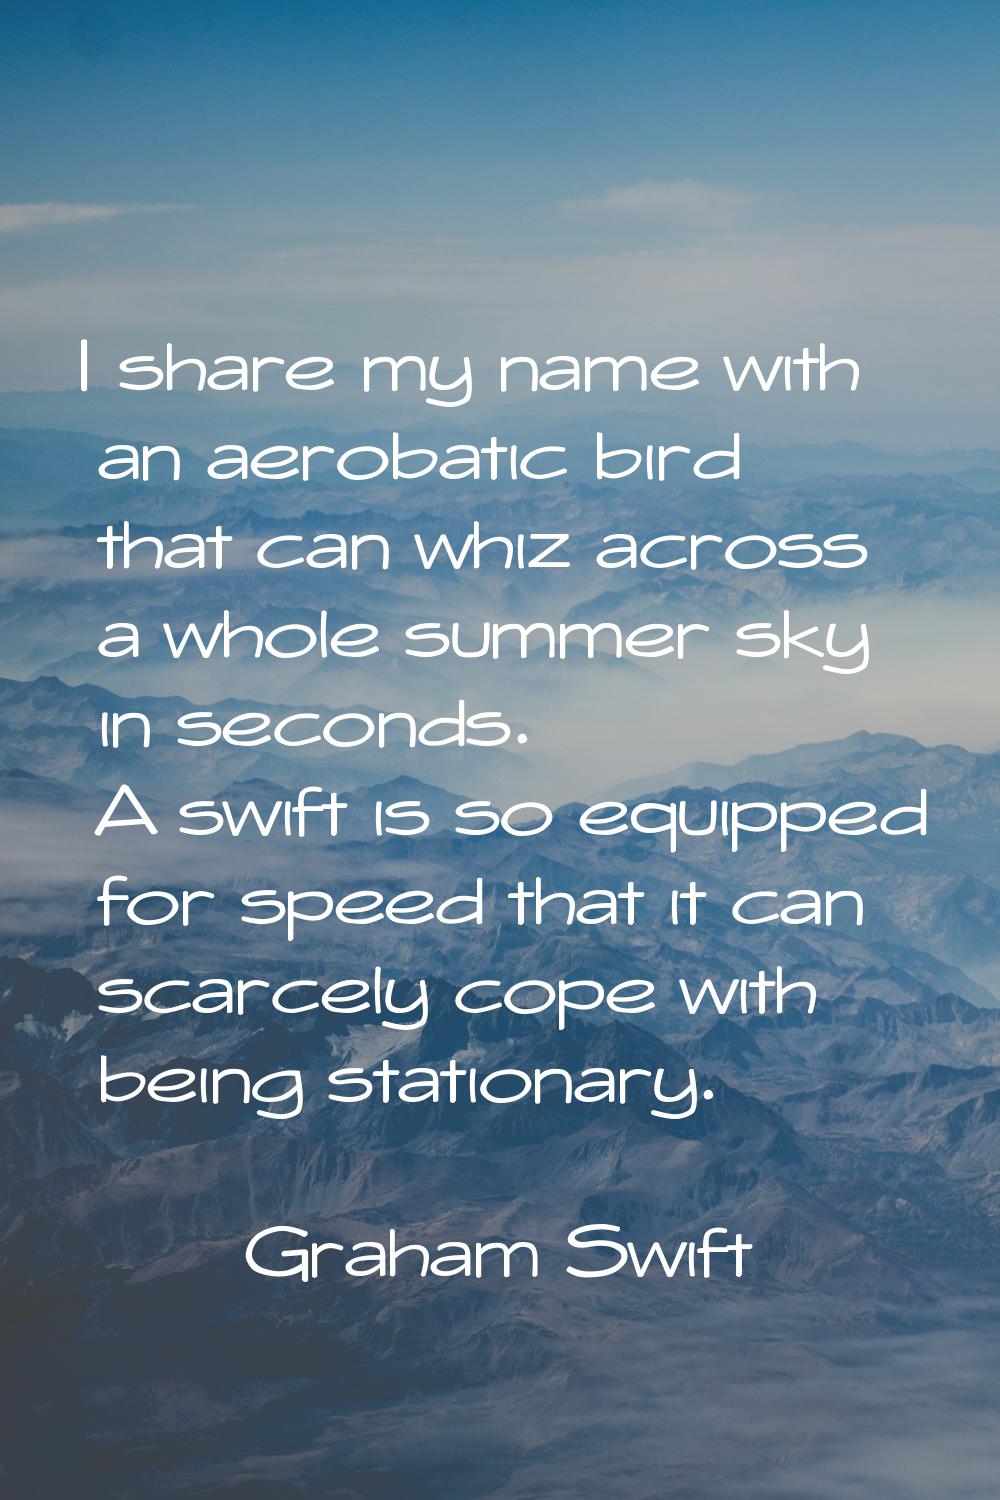 I share my name with an aerobatic bird that can whiz across a whole summer sky in seconds. A swift 